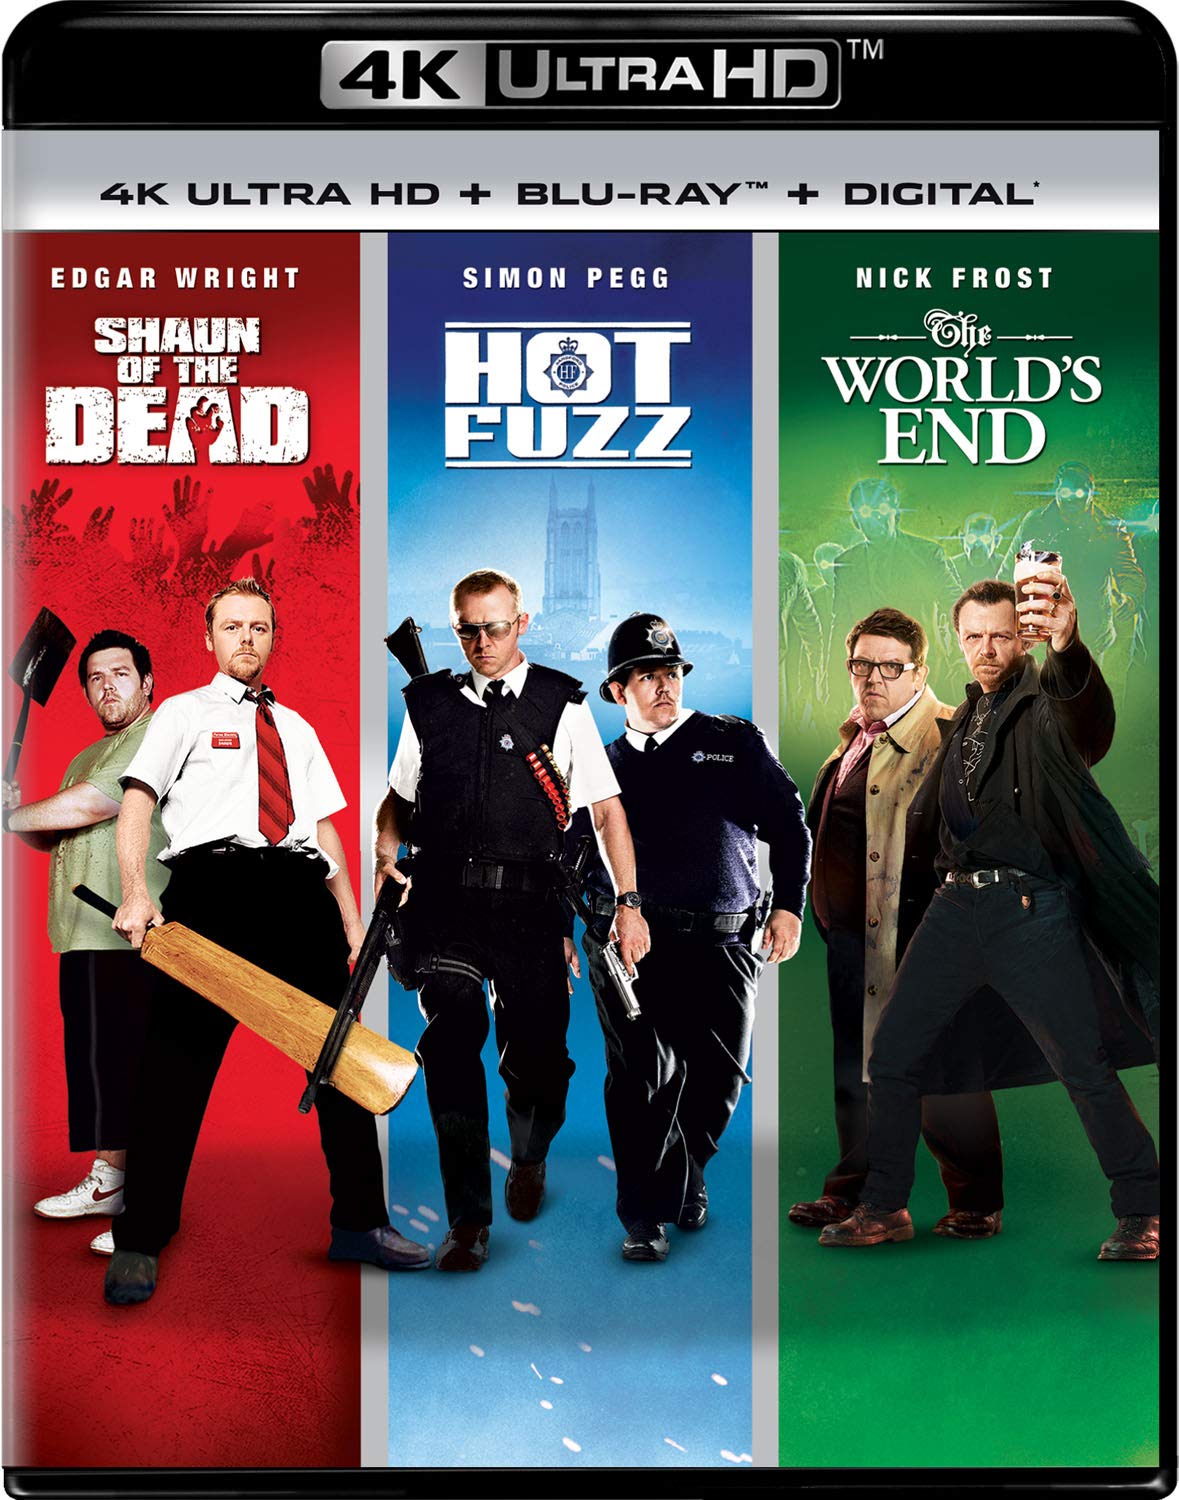 Shaun Of The Dead/Hot Fuzz/The World's End (4K Ultra HD) - UHD [ 2013 ]  - Comedy Movies On 4K Ultra HD Blu-ray - Movies On GRUV